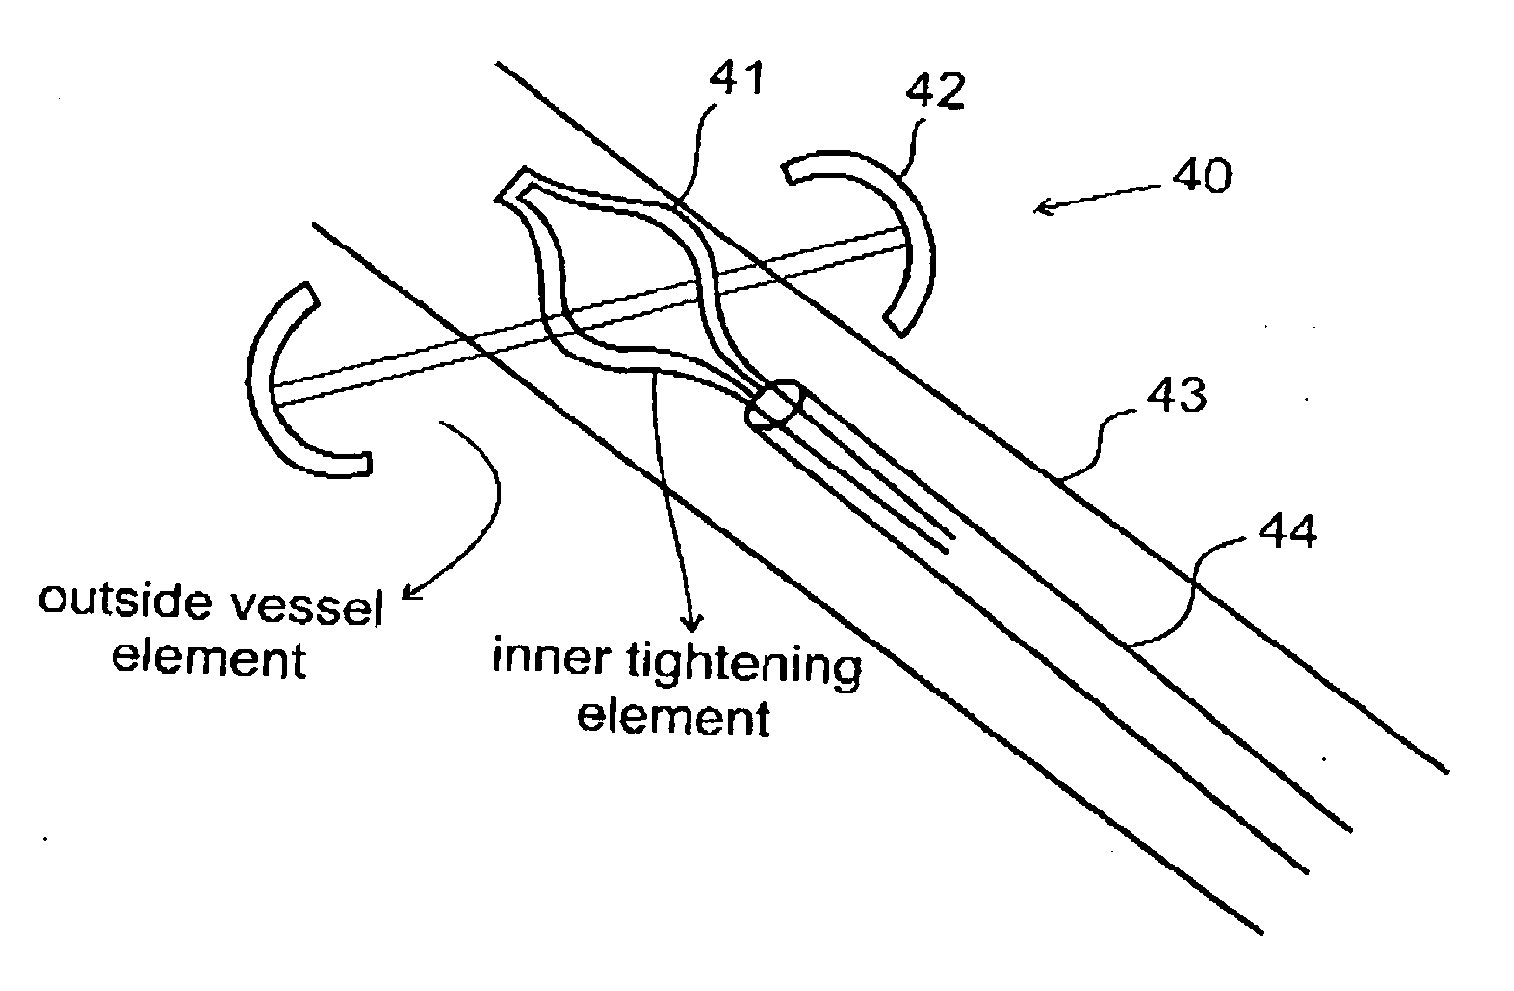 Apparatus and method for enabling perforating vein ablation